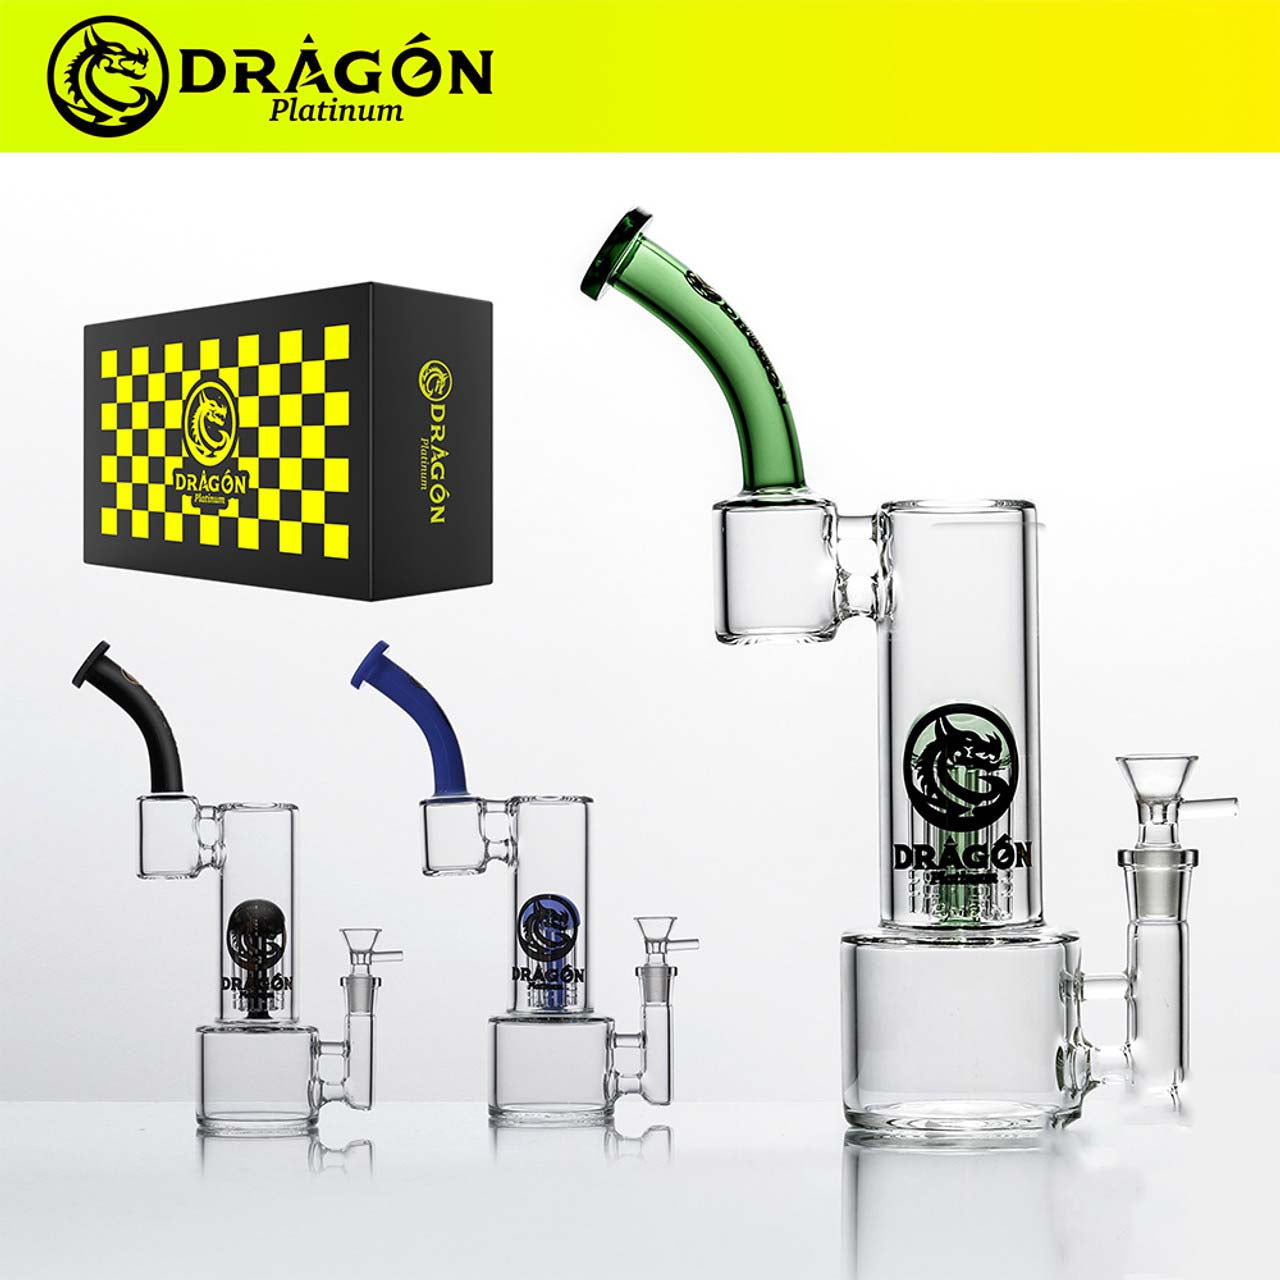 Dragon Platinum Water Pipe Bent Neck With Tree Perc - 550 Grams - 11.4 Inches - Assorted Colors [WPE-013]